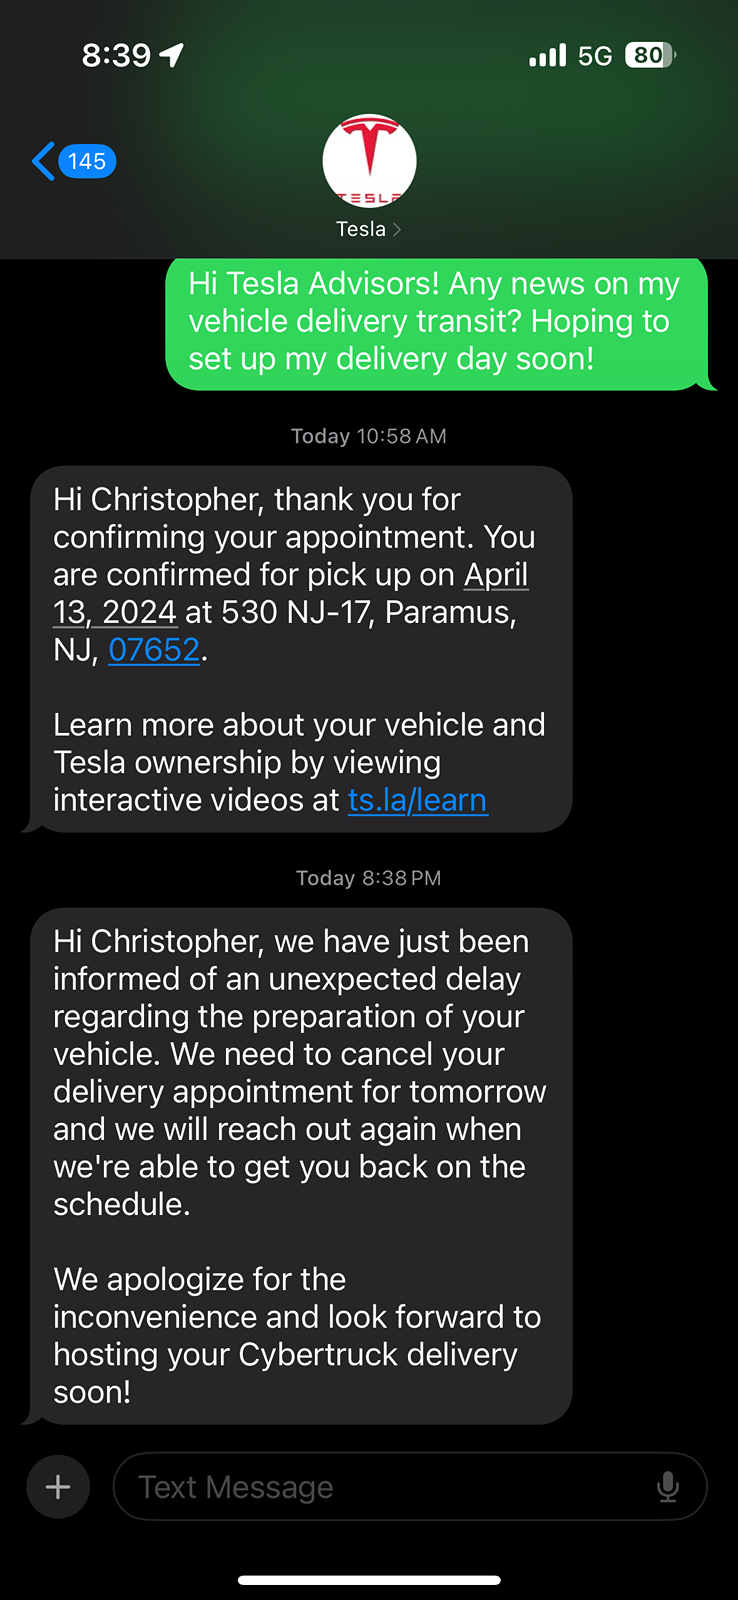 Tesla Cybertruck Vermont VIN has entered the chat IMG_1113